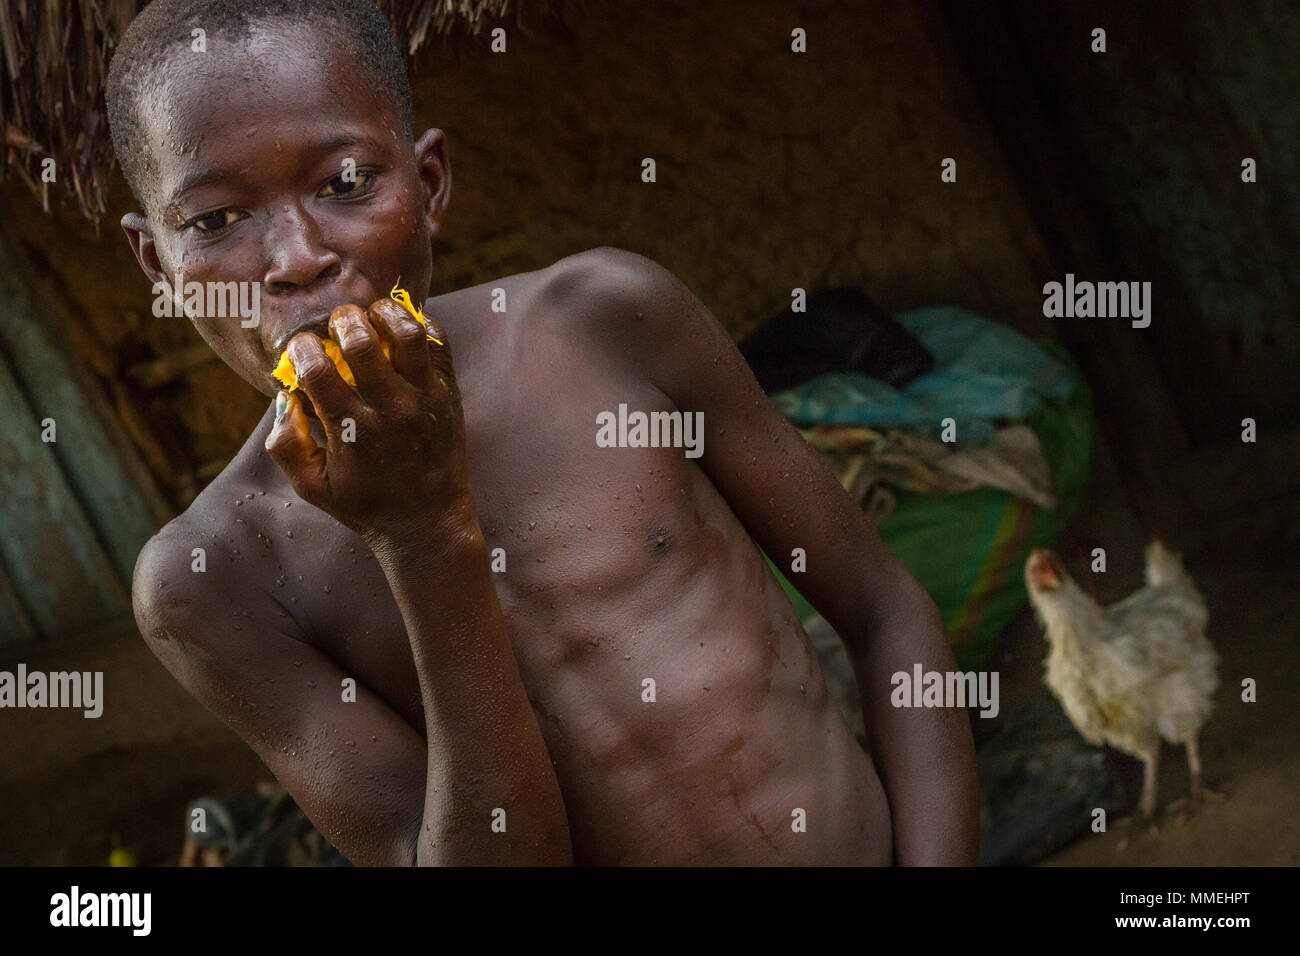 YONGORO, SIERRA LEONE - June 06, 2013: West Africa, portrait of an unknown boy while eating a yellow fruit in the background a chicken, near the capit Stock Photo